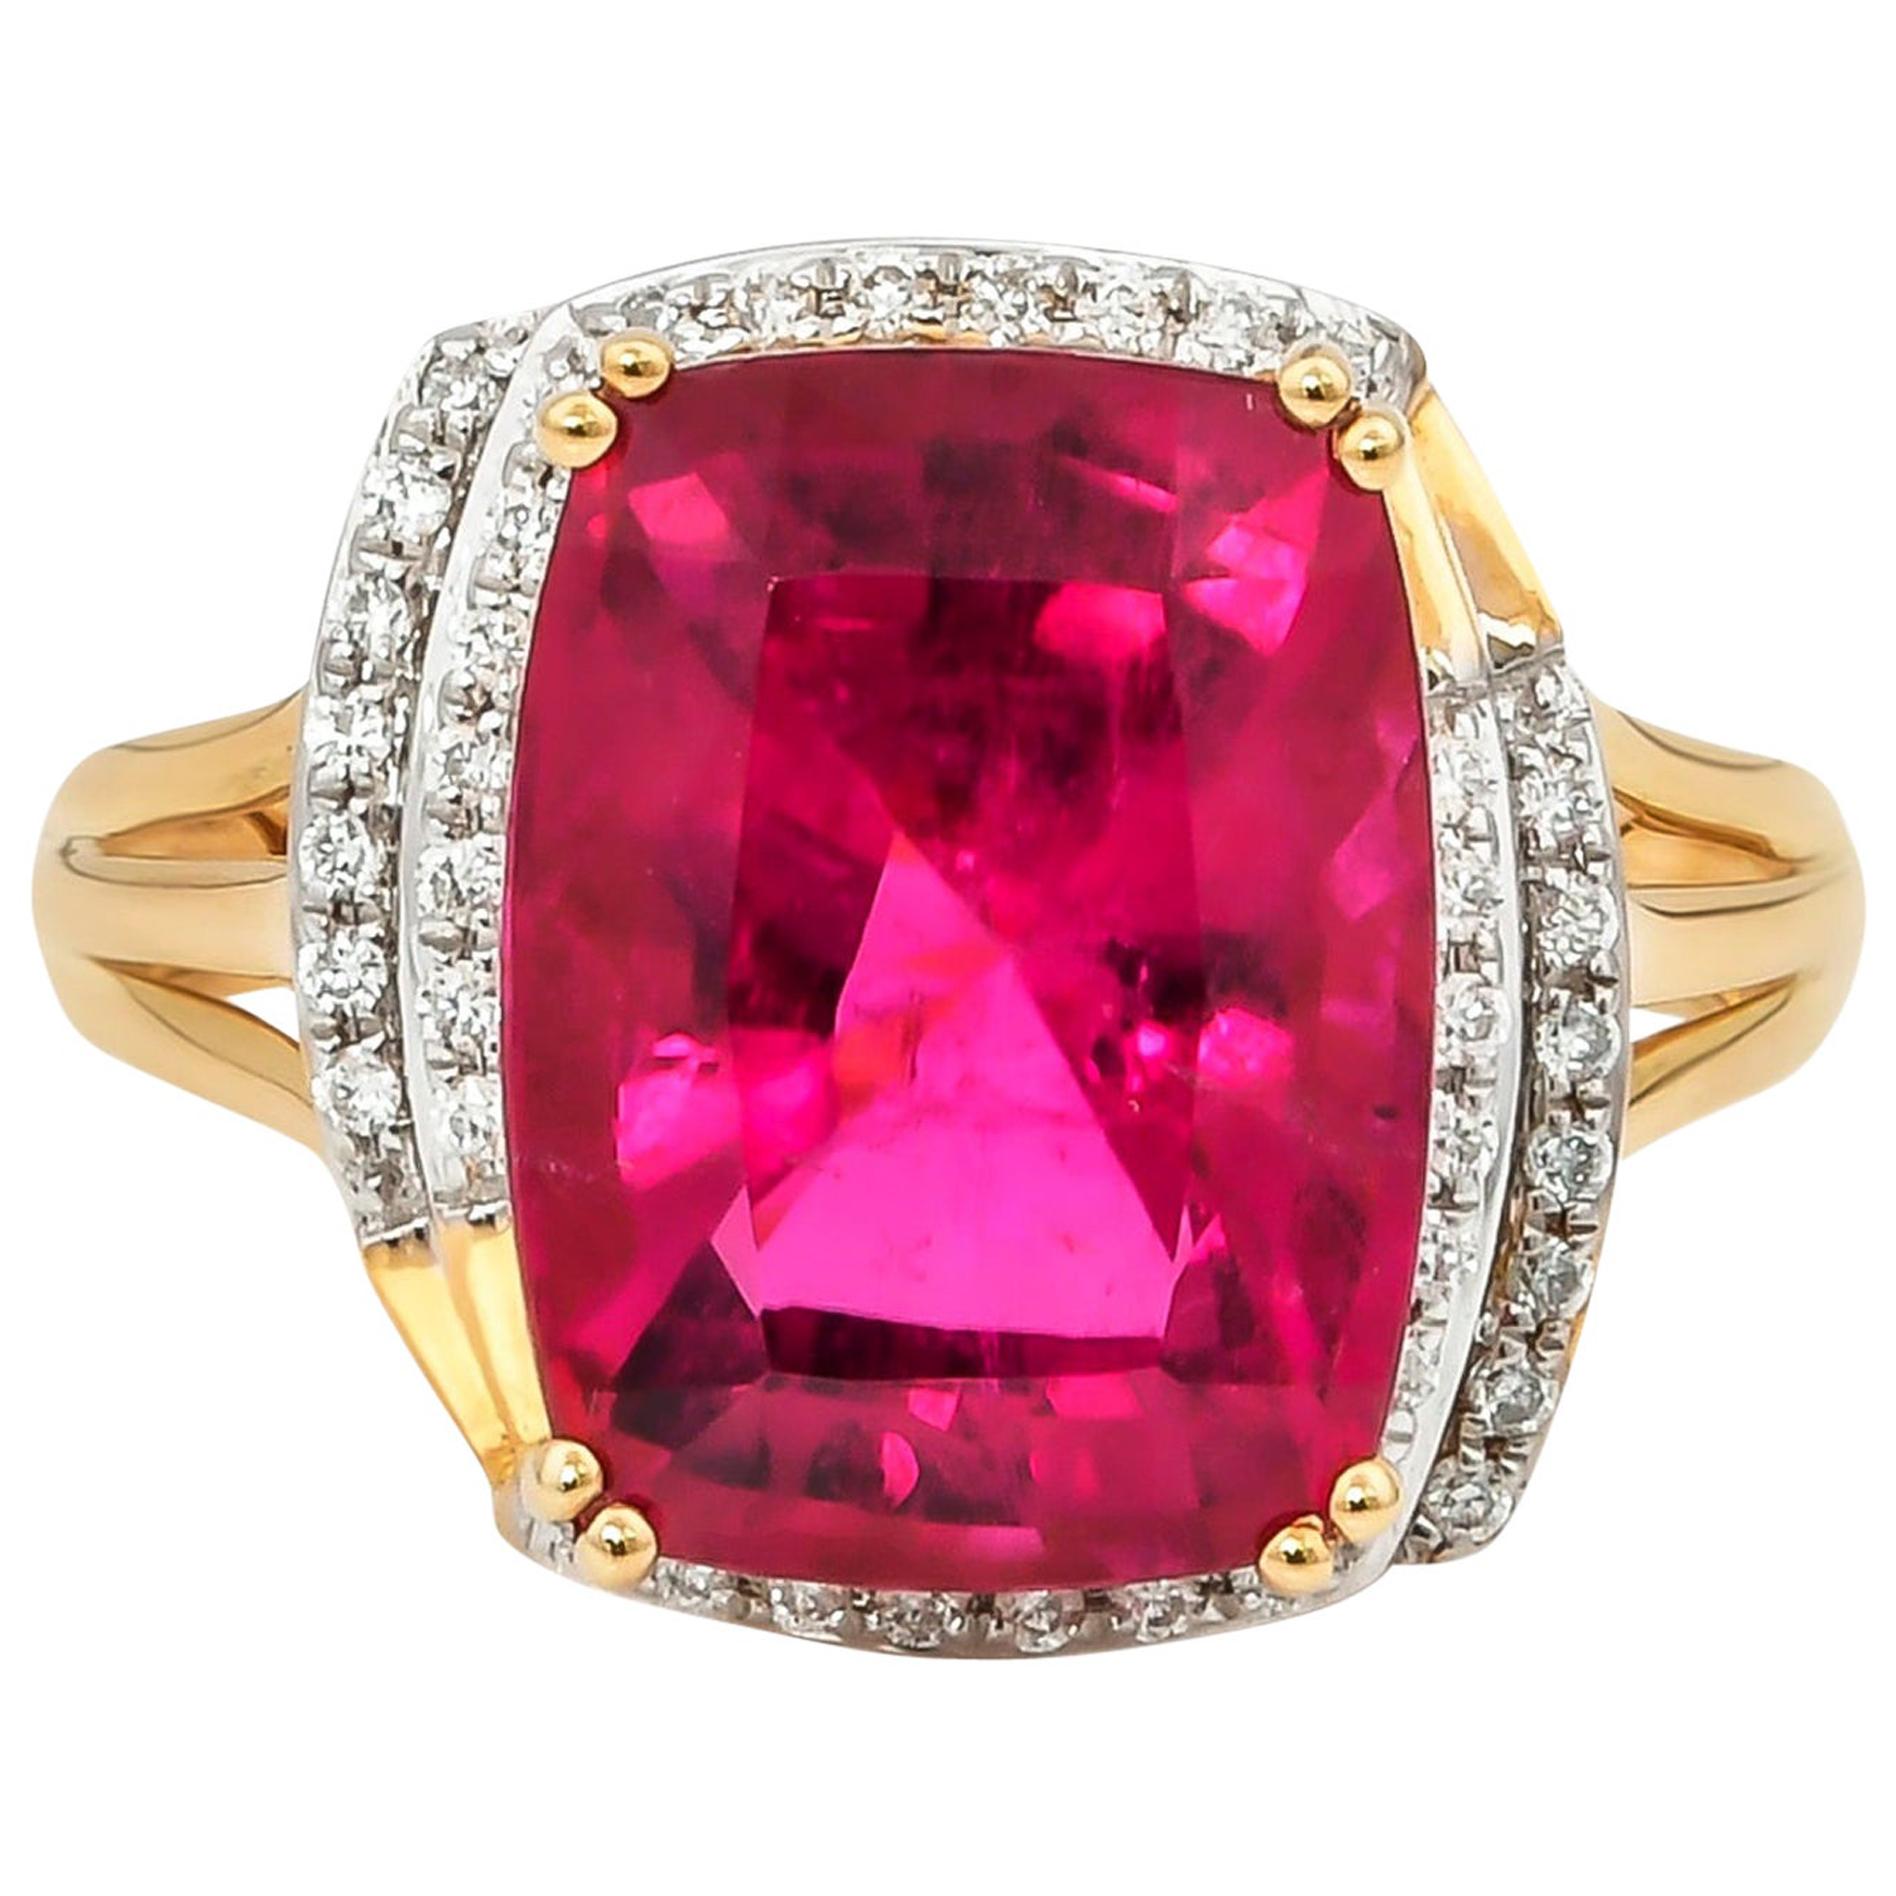 7.86 Carat Cushion Shaped Rubelite Ring in 18 Karat Yellow Gold with Diamonds For Sale